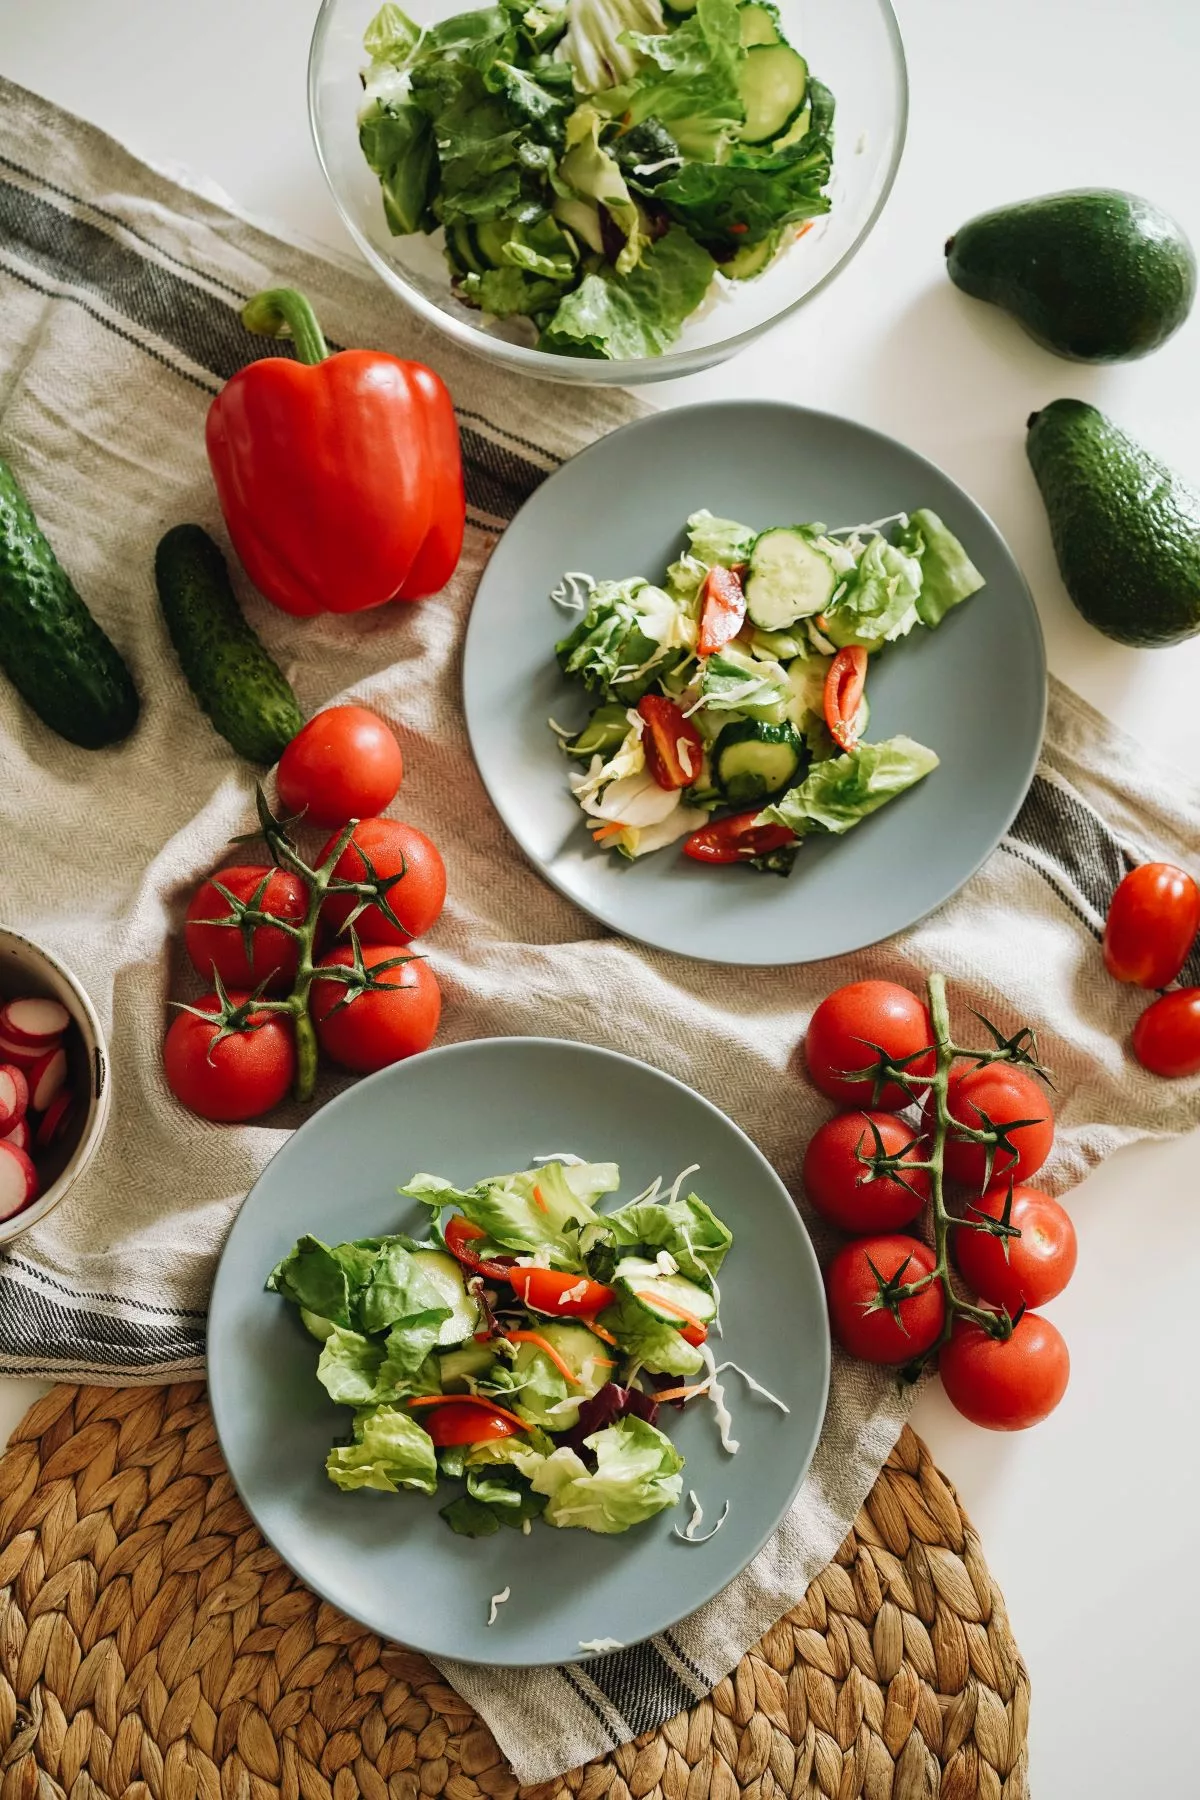 How to Sustainably Transition to Keto Diet